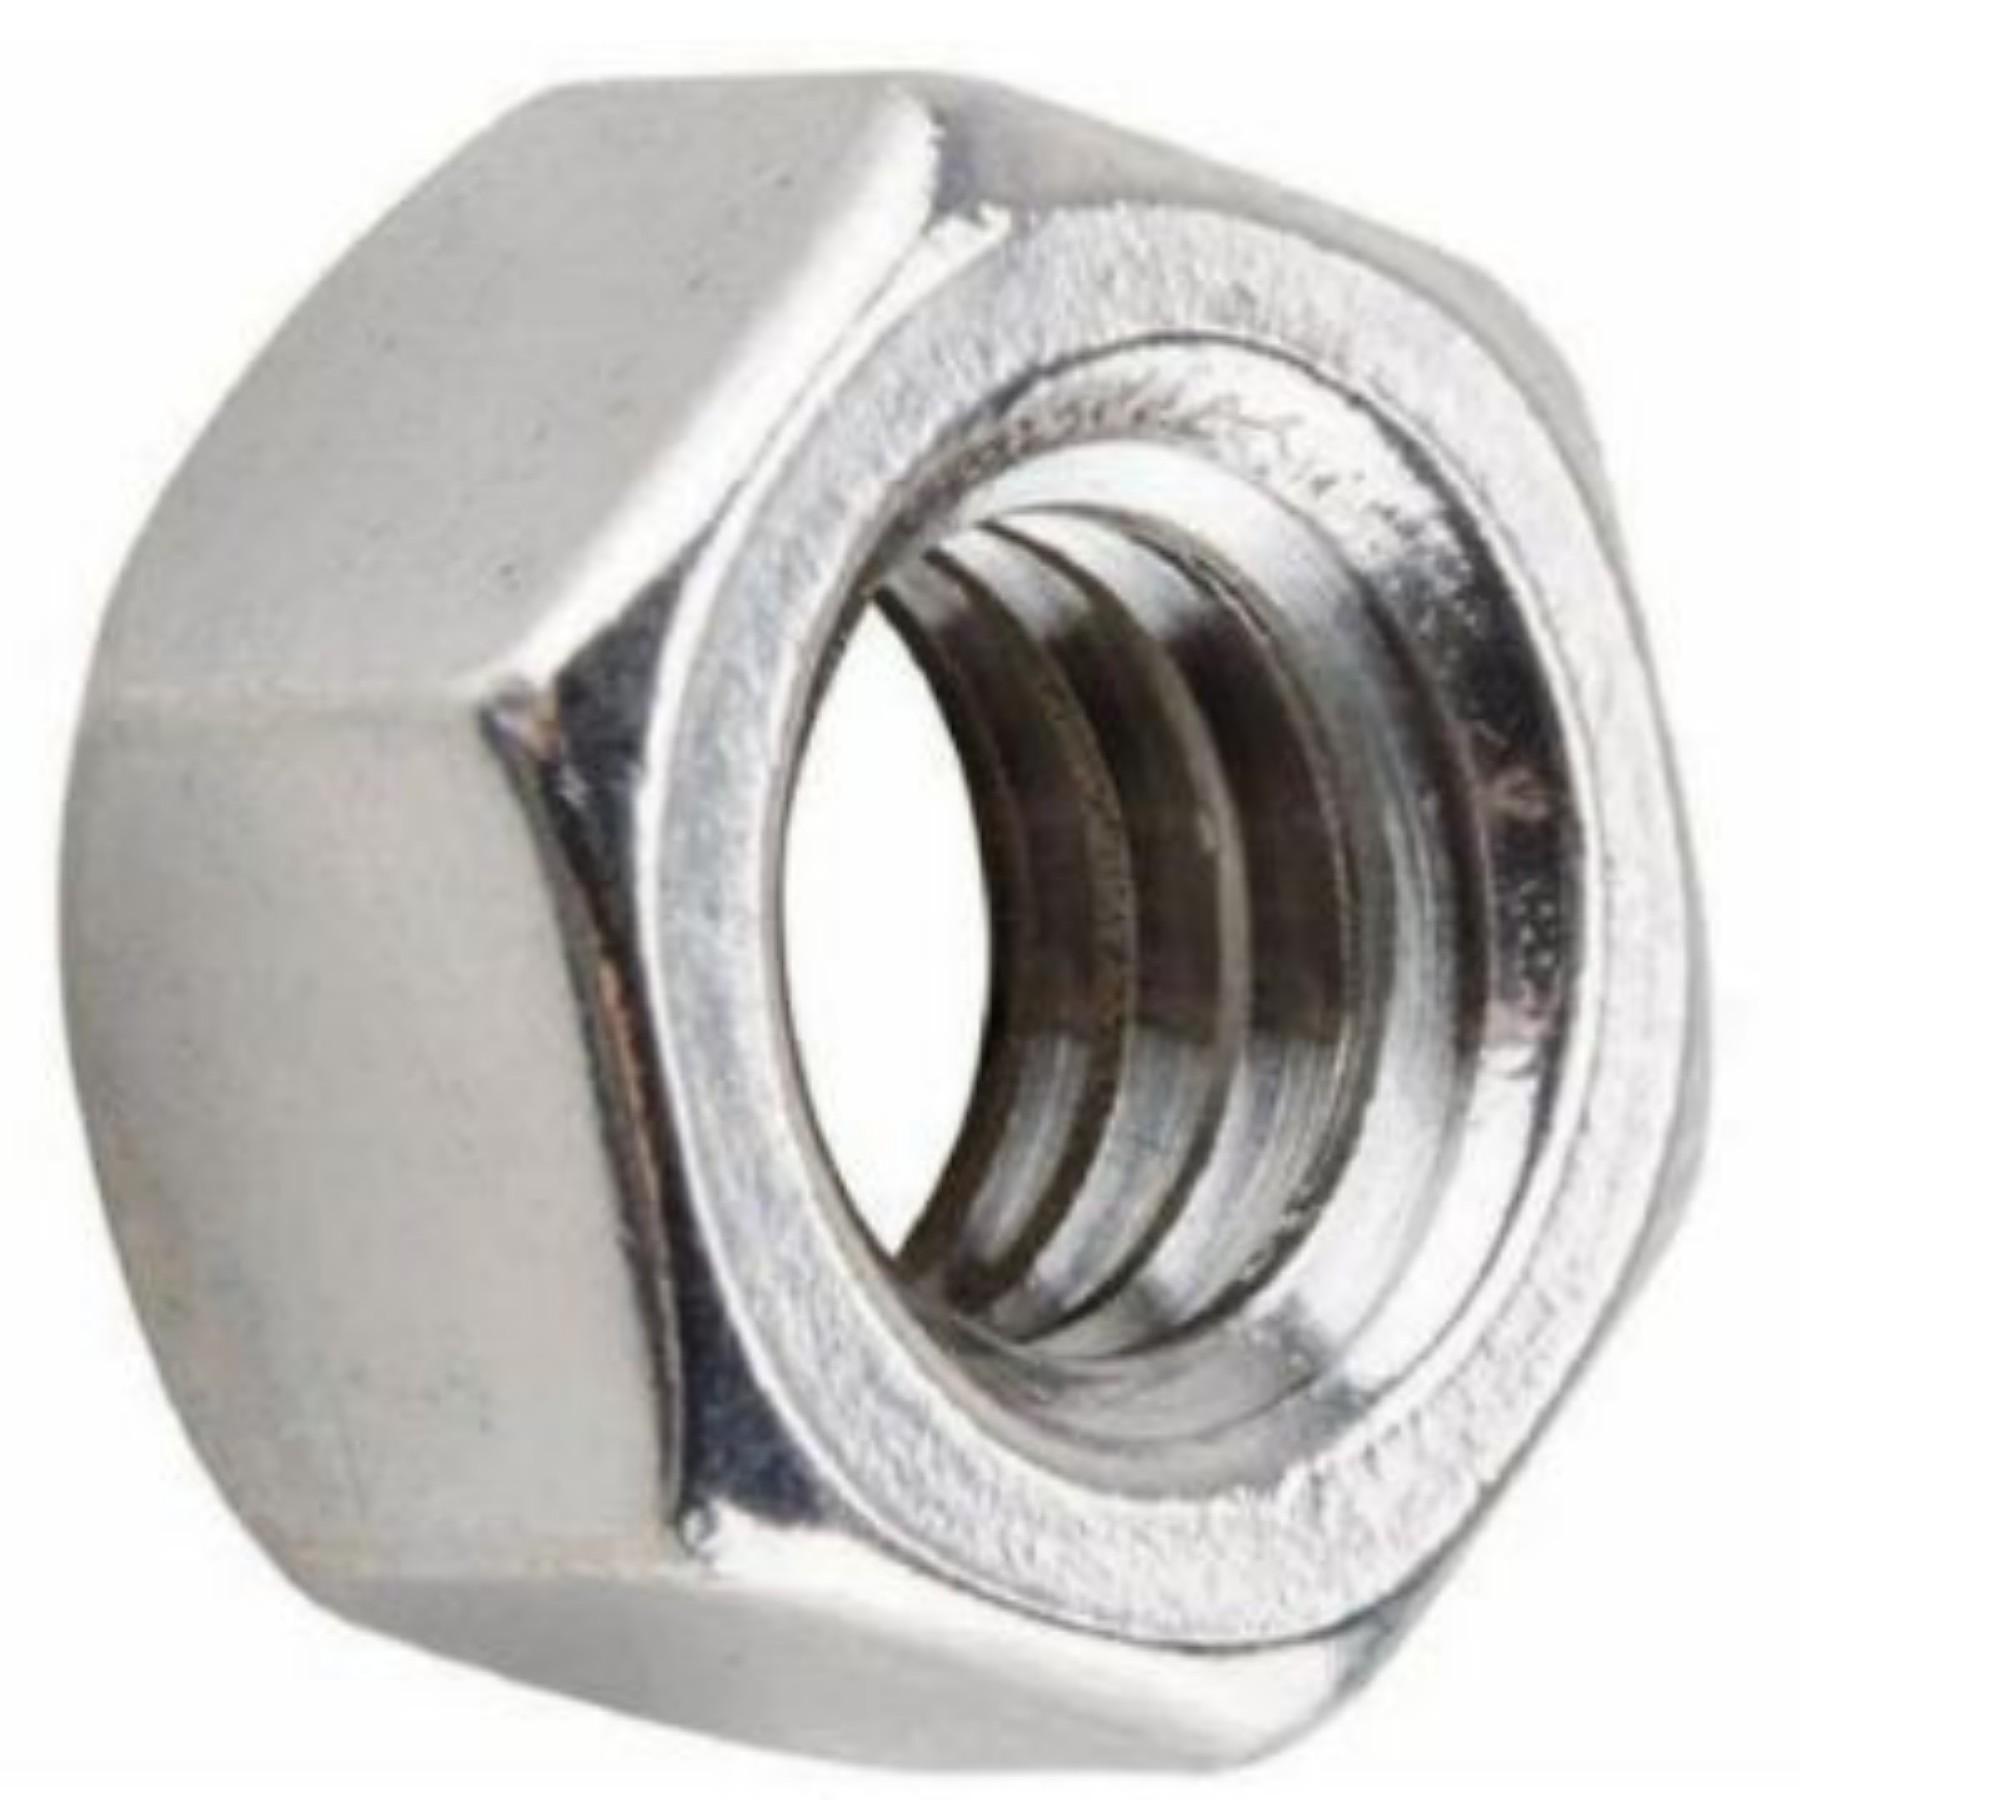 SUN Stainless Steel SS Lock Nuts_0